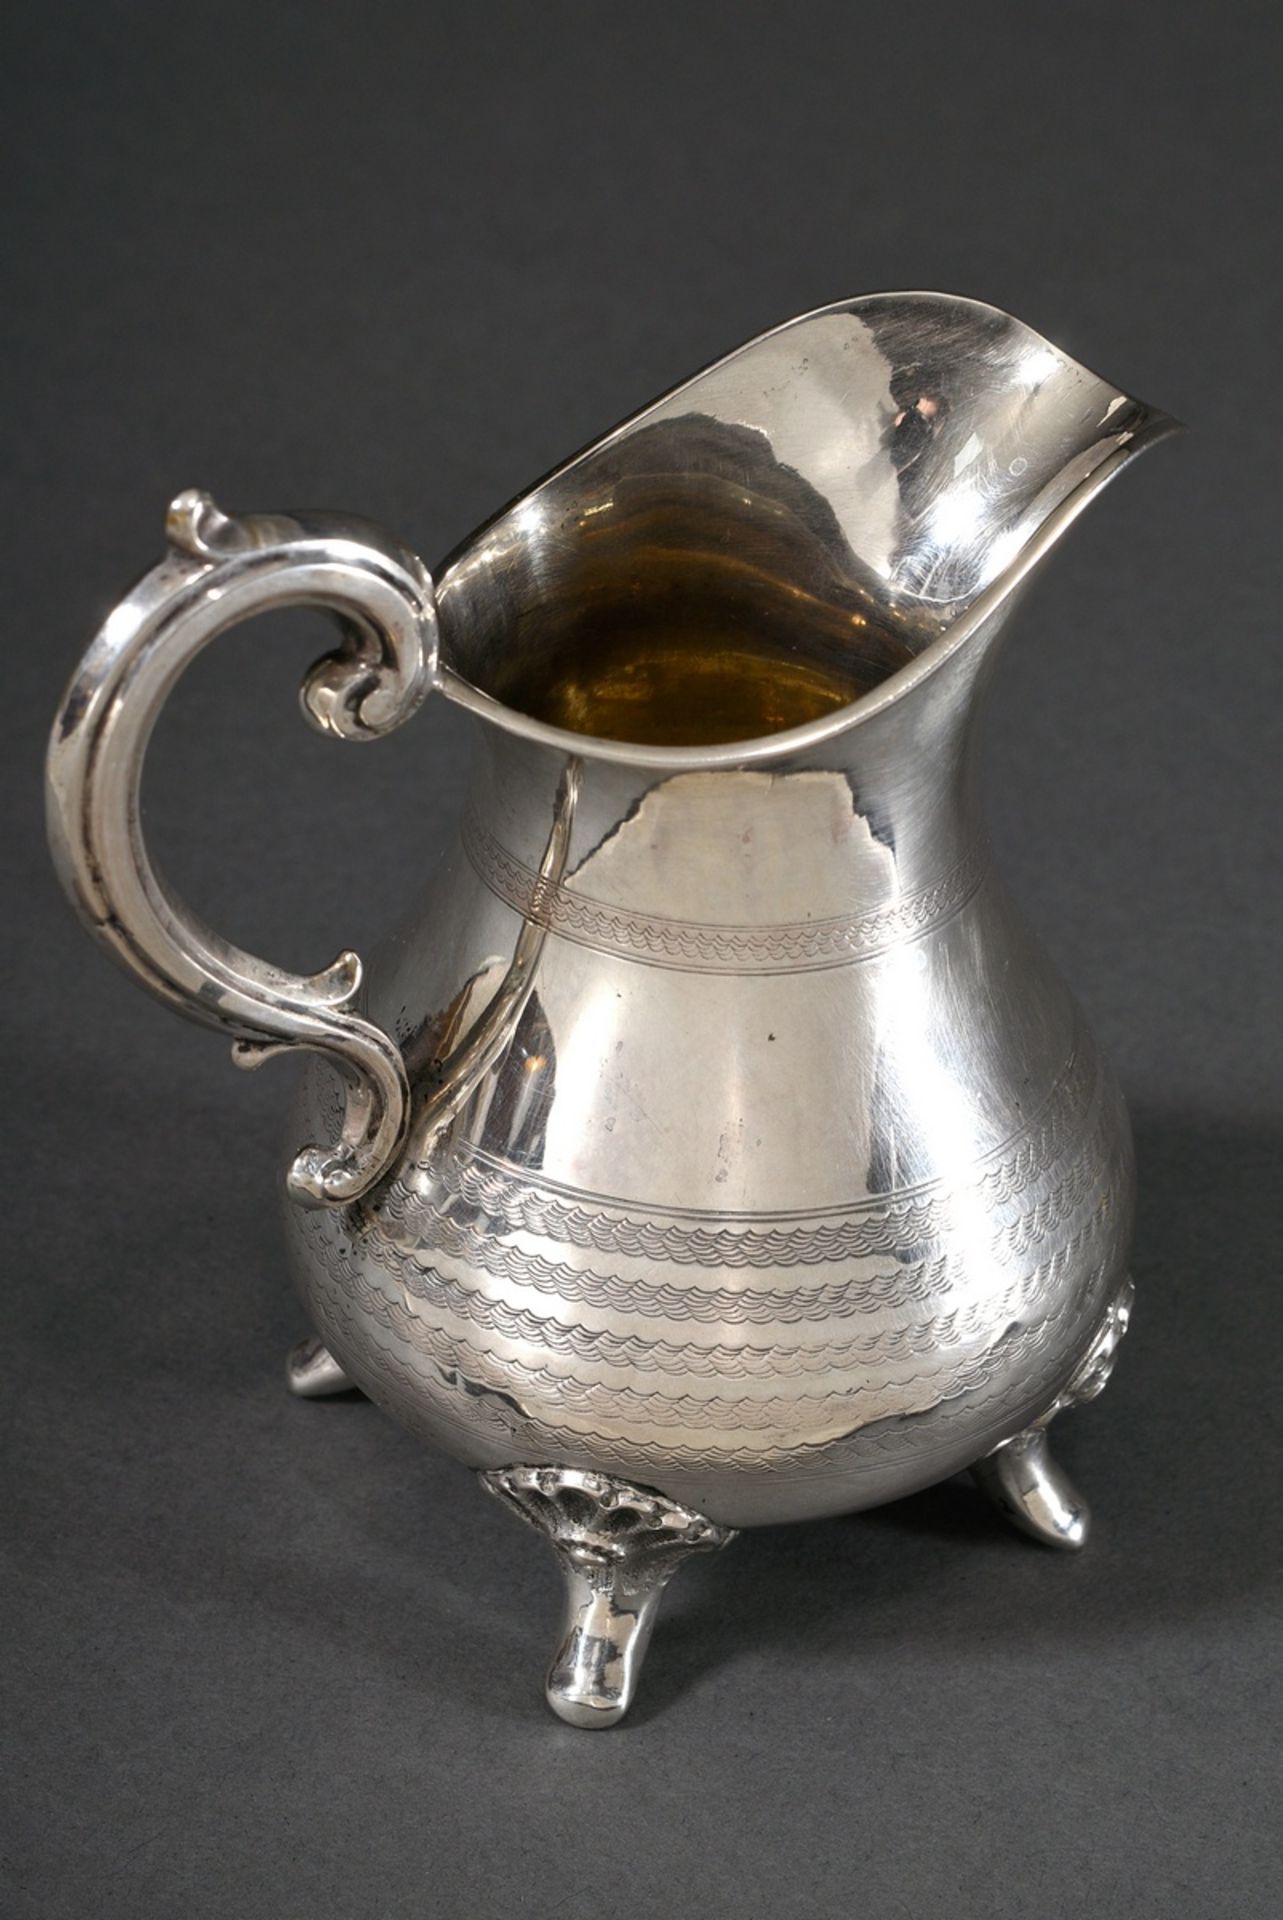 Cream jug on four shell feet with guilloché frieze, ligatured monogram engraving "CM" and curved ha - Image 2 of 5